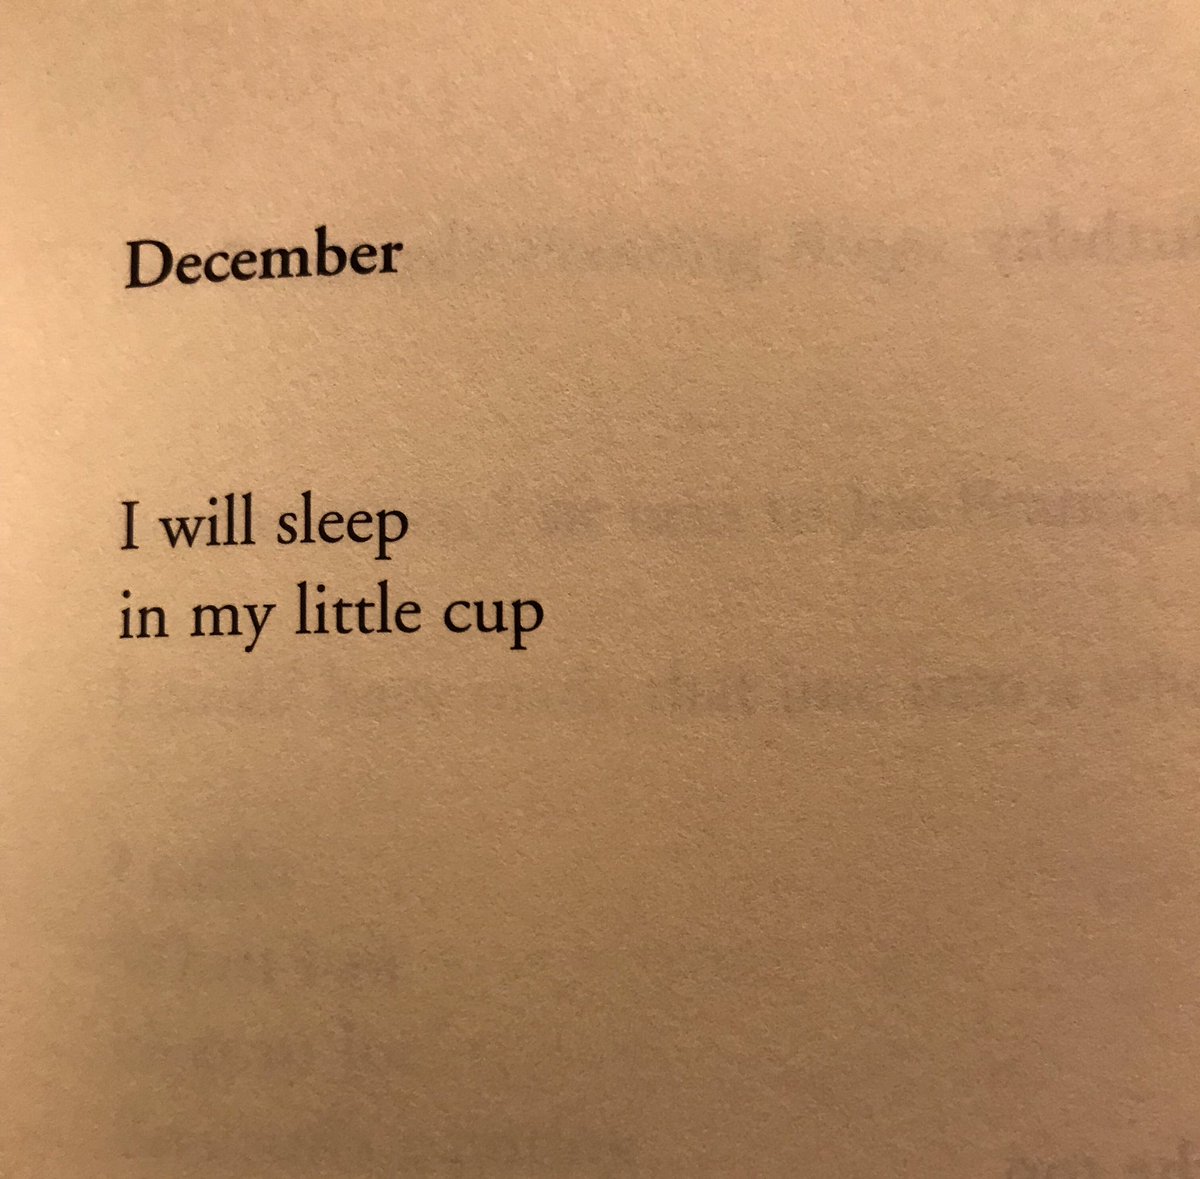 i’d like to welcome everybody to december with the greatest poem of all time